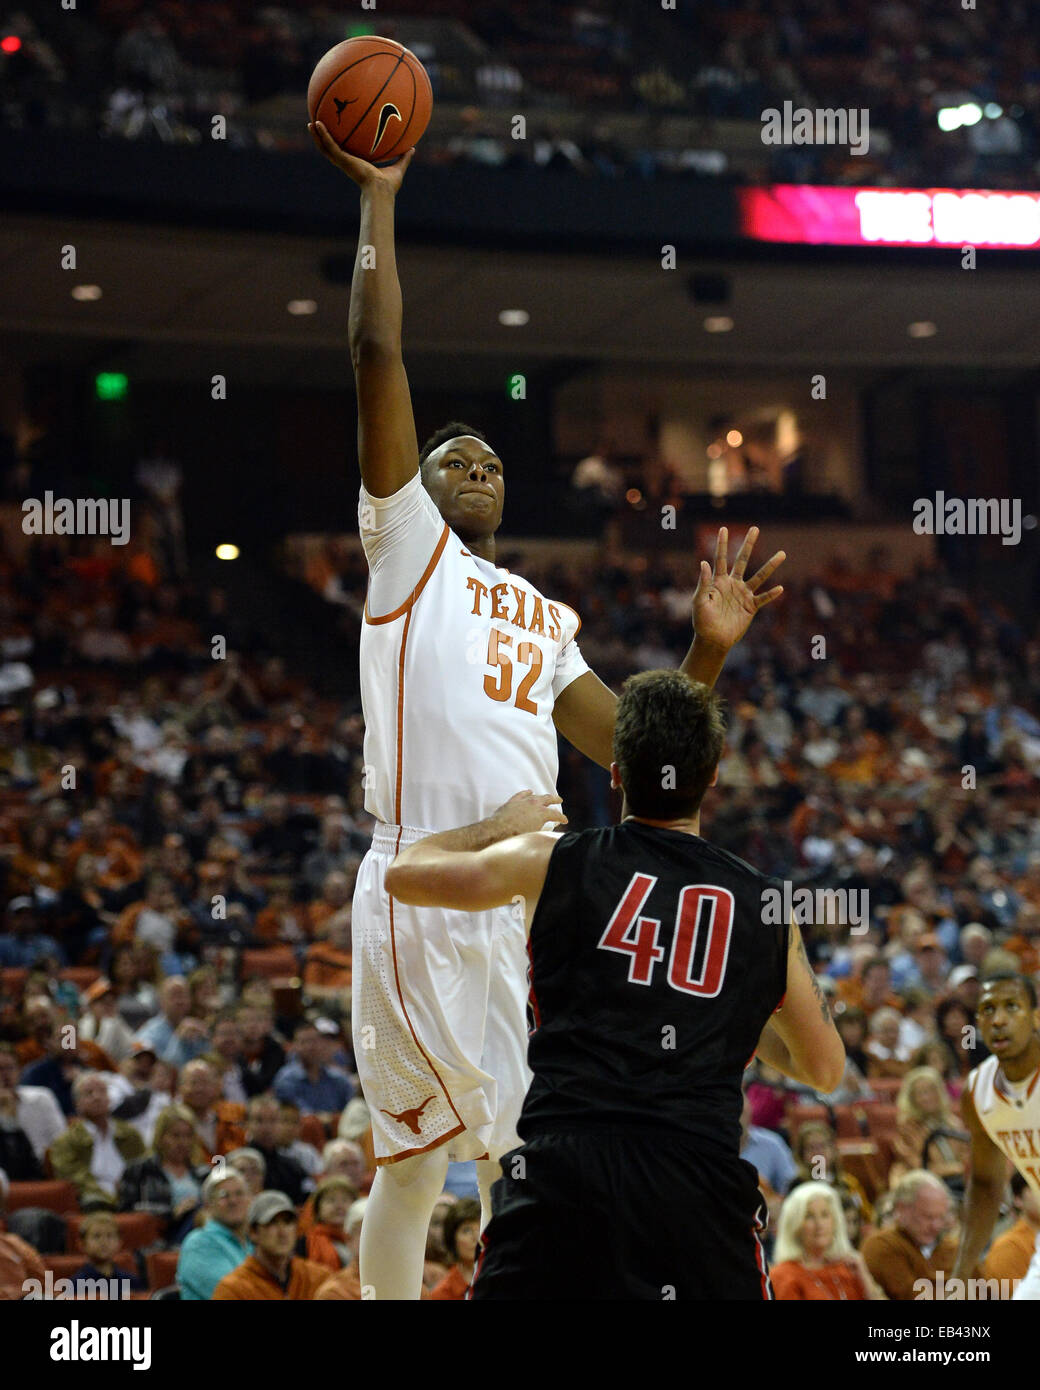 Austin, Texas. 25th Nov, 2014. Brandon Allums #52 of the Texas Longhorns in action vs the Saint Francis Red Flash at the Frank Erwin Center in Austin Texas. Texas leads Saint Francis 36-23 at the half. Credit:  csm/Alamy Live News Stock Photo